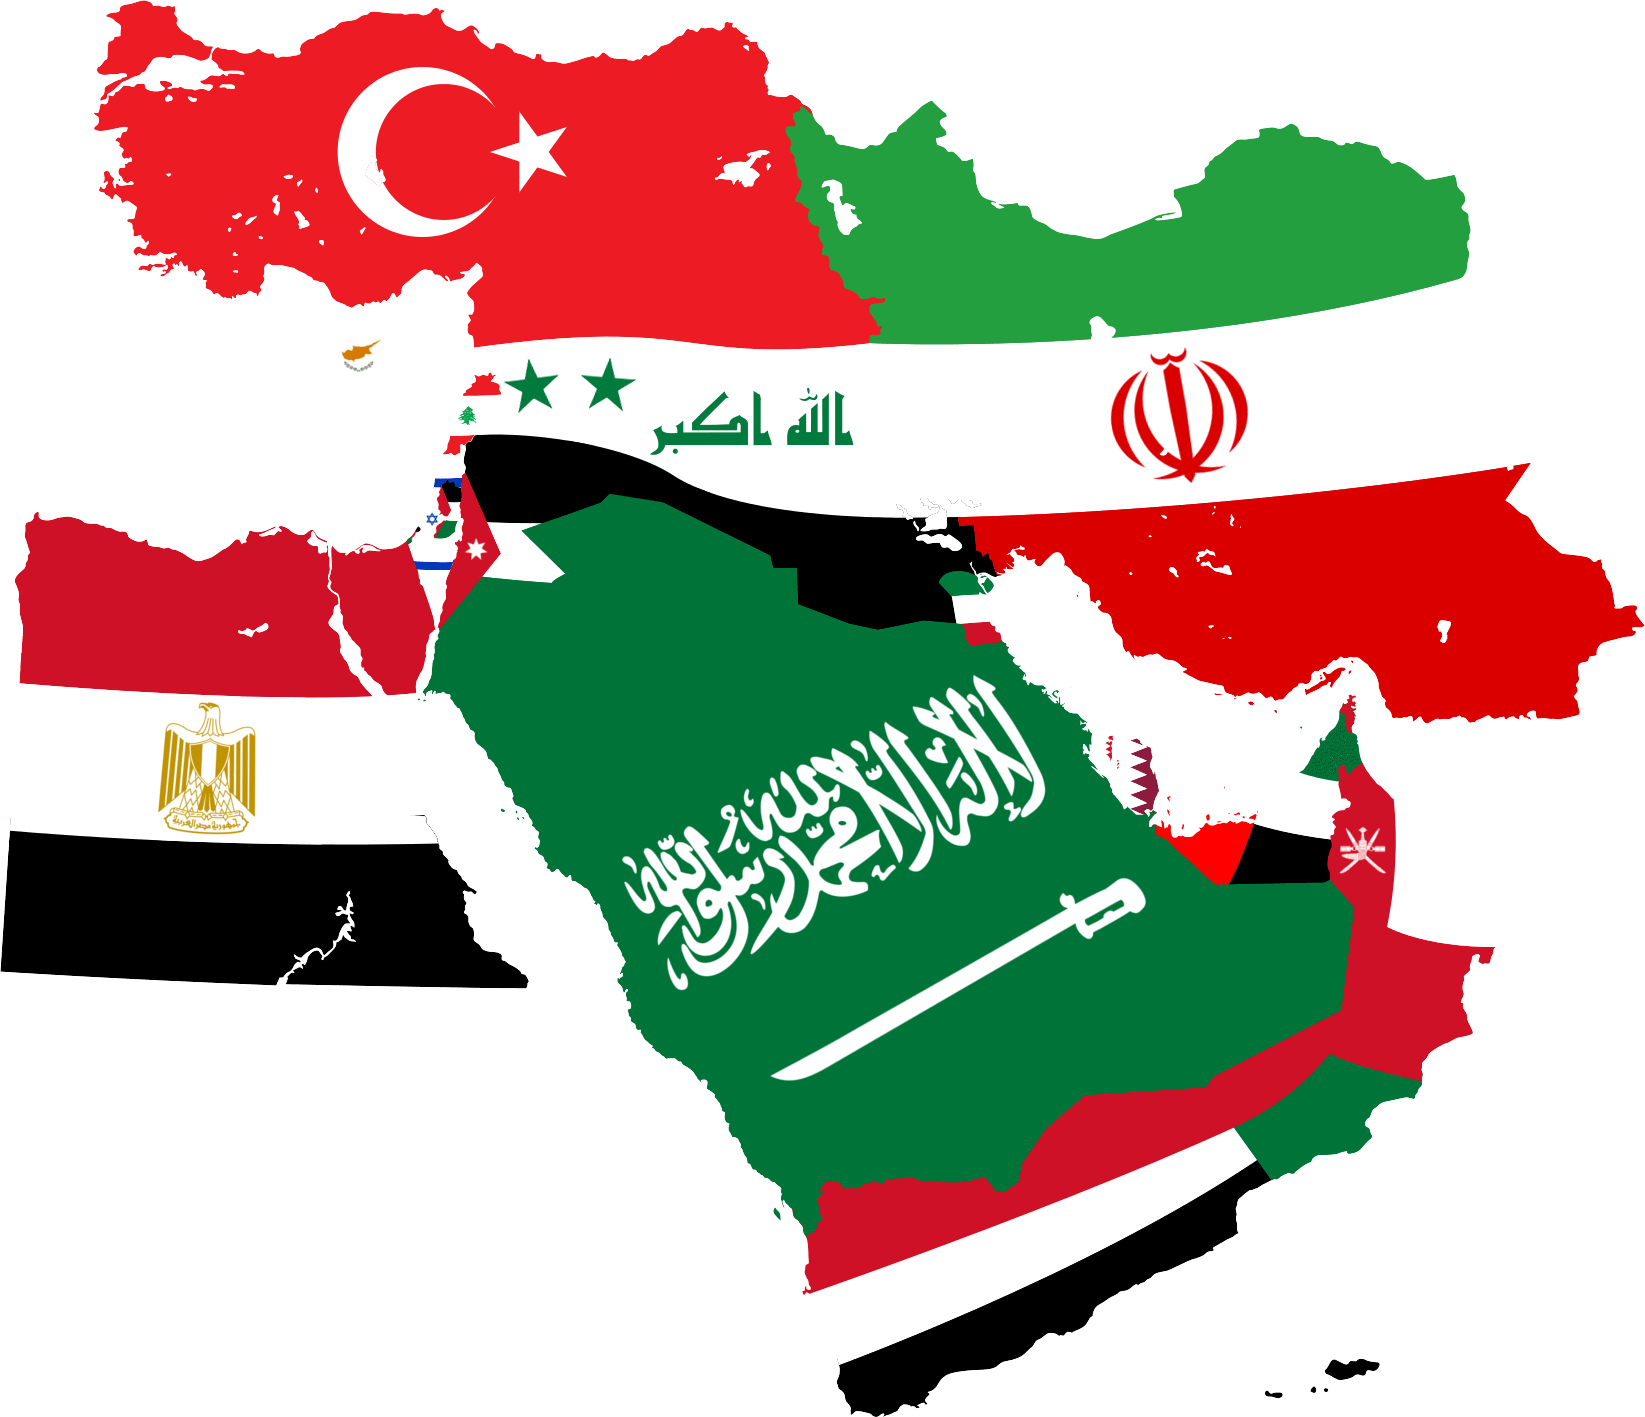 44-440885_map-flag-clipart-music-middle-east-map-with